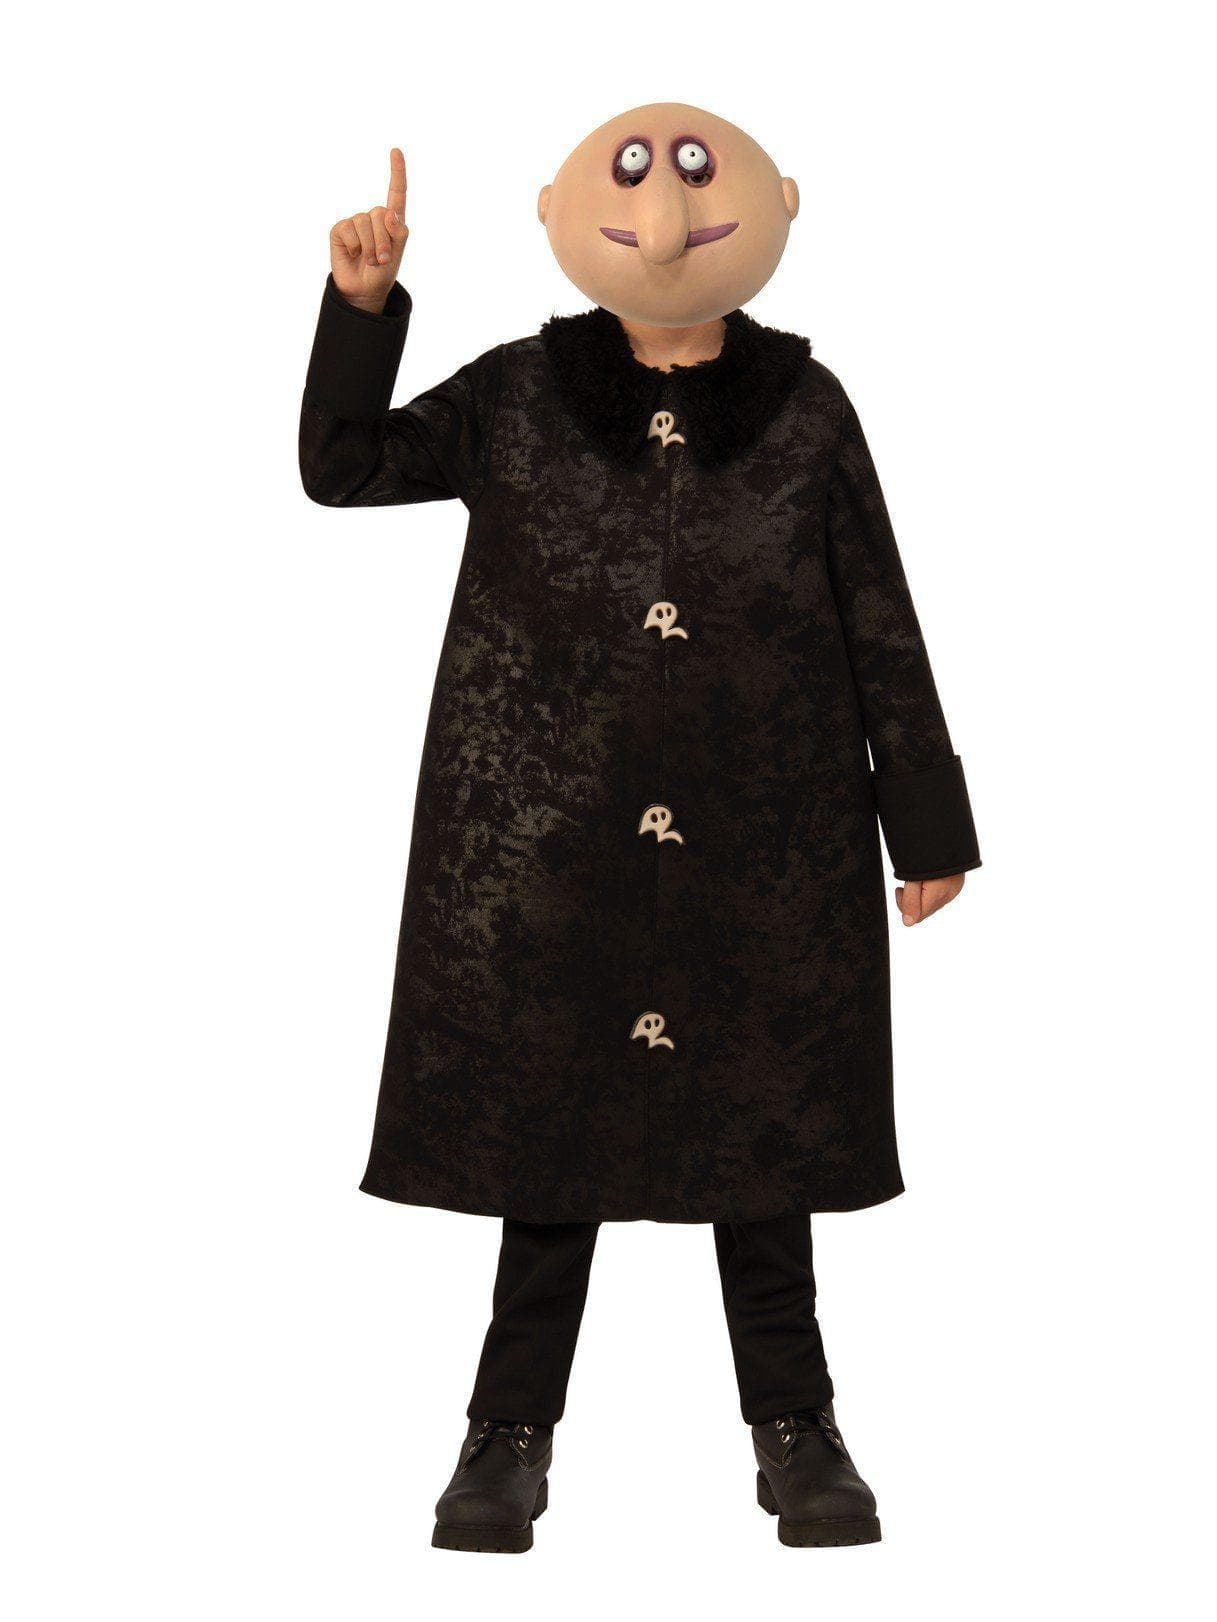 Kids Addams Family Animated Uncle Fester Costume - costumes.com